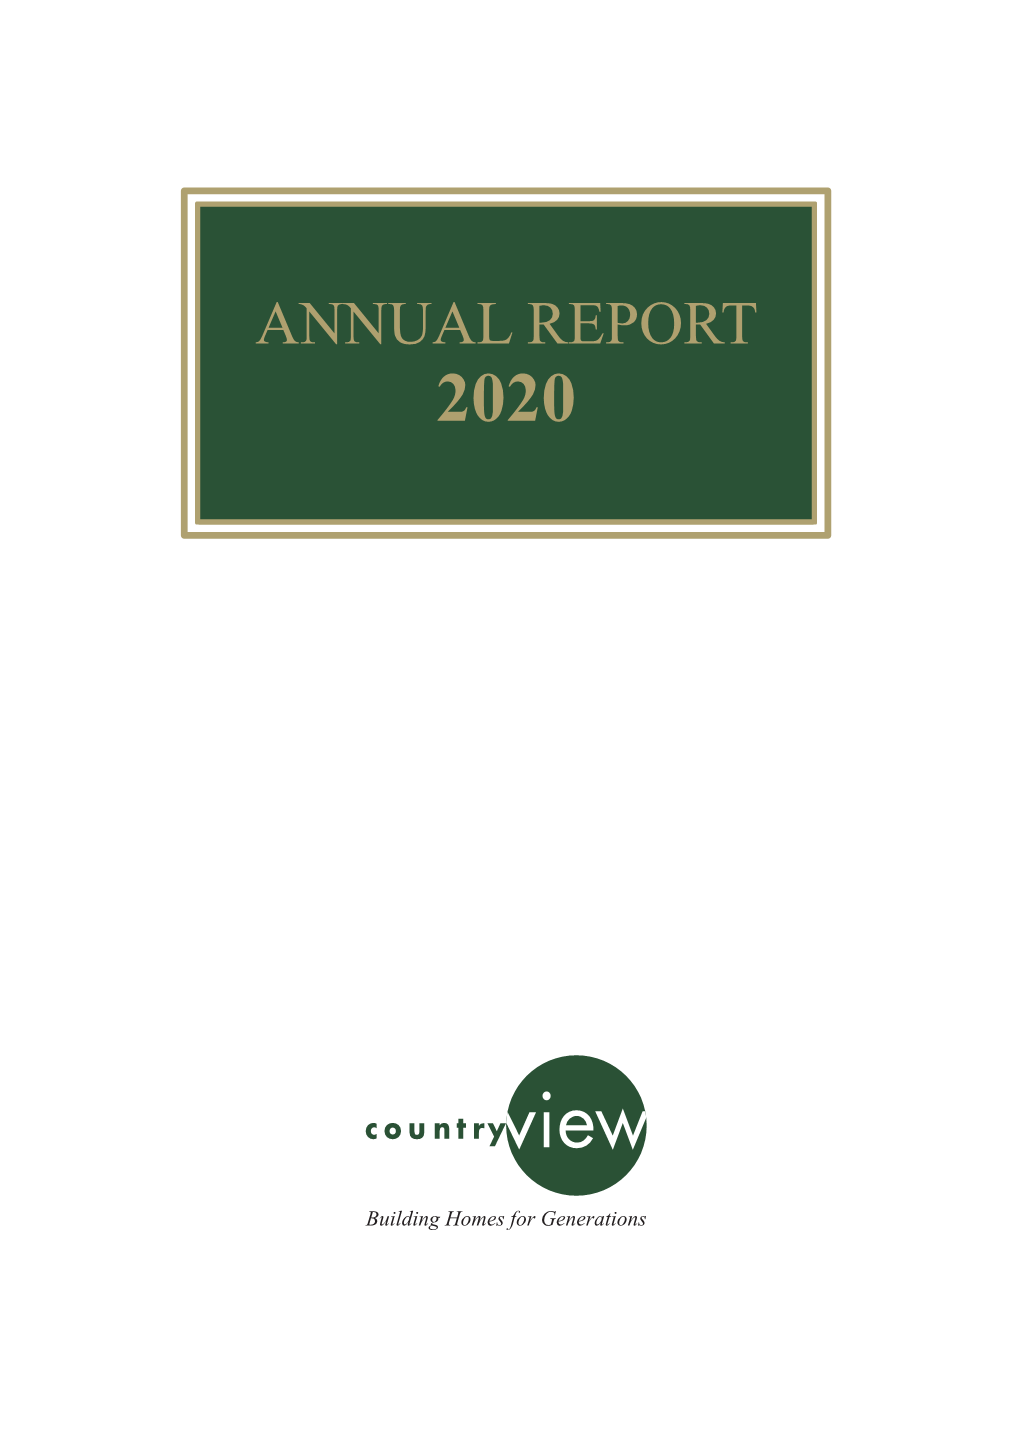 Annual Report 2020 Message from Chairman